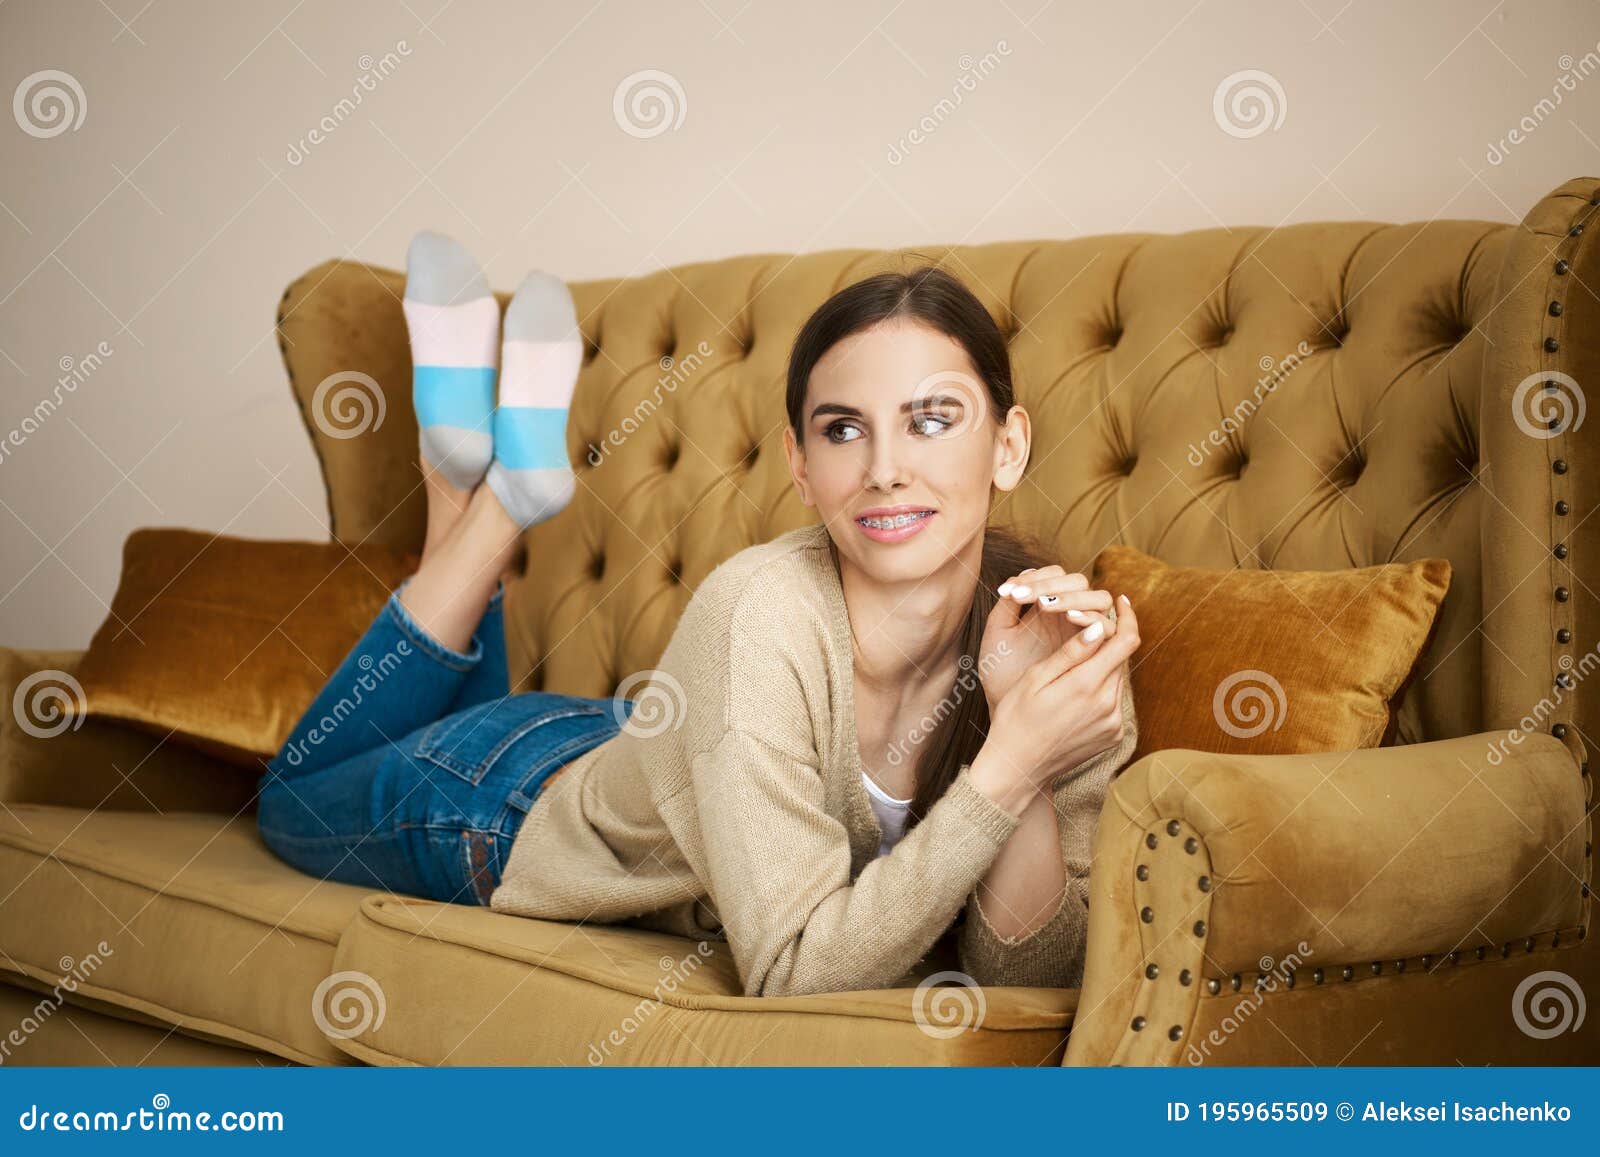 girl on couch relaxing in living room and recalling pleasant moments